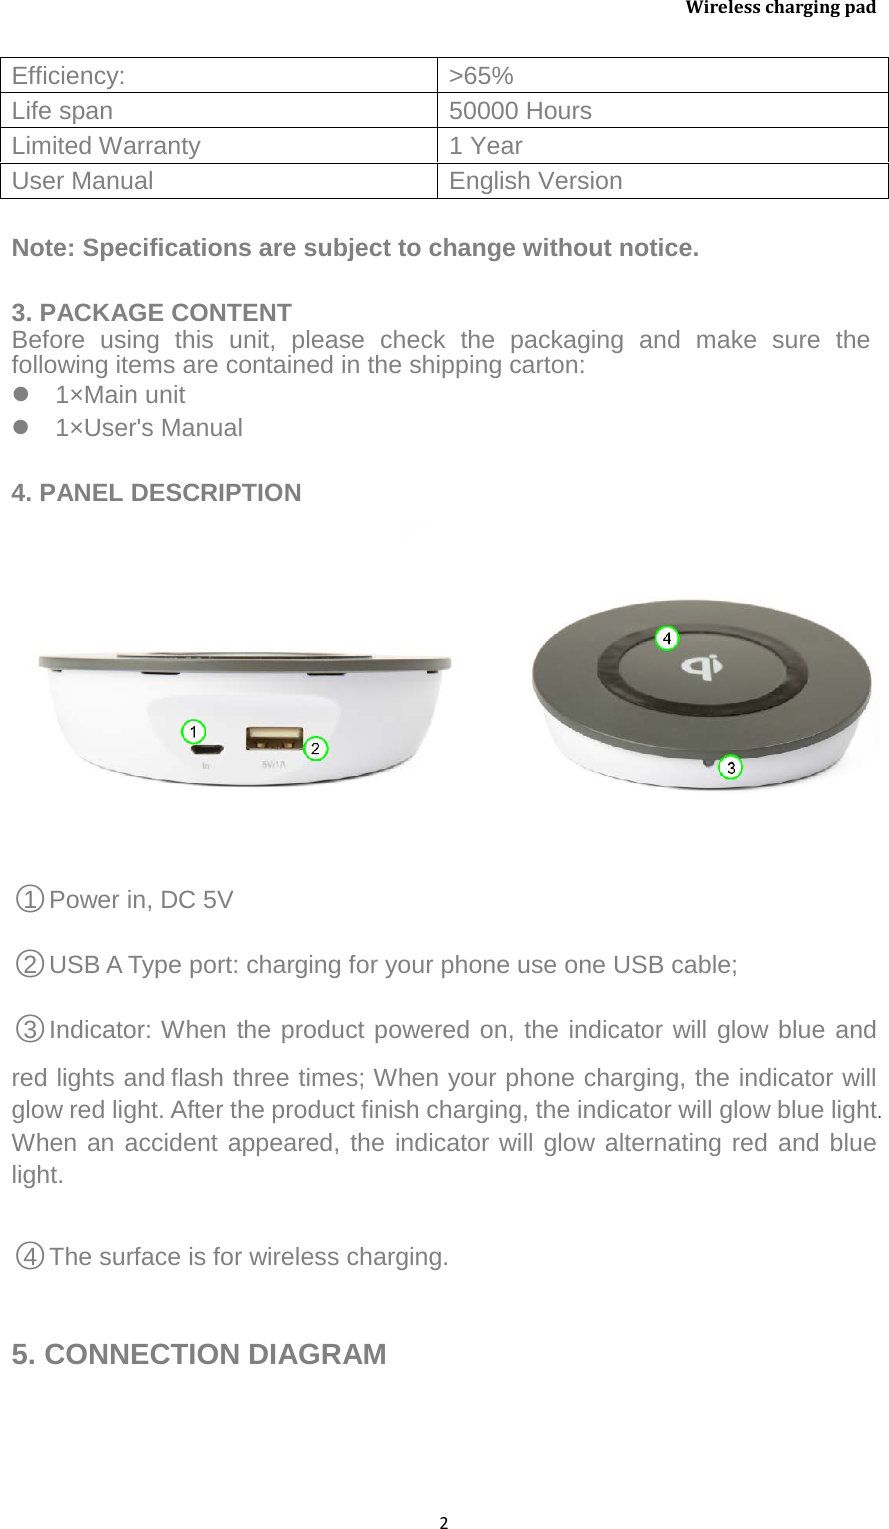     Wireless charging pad Efficiency: &gt;65% Life span 50000 Hours Limited Warranty 1 Year User Manual English Version  Note: Specifications are subject to change without notice.    3. PACKAGE CONTENT Before using this unit, please check the packaging and make sure the following items are contained in the shipping carton:   1×Main unit   1×User&apos;s Manual    4. PANEL DESCRIPTION   A○1E APower in, DC 5V   A○2E AUSB A Type port: charging for your phone use one USB cable; A○3E AIndicator: When the product powered on, the indicator will glow blue and red lights and flash three times; When your phone charging, the indicator will glow red light. After the product finish charging, the indicator will glow blue light. When an accident appeared, the indicator will glow alternating red and blue light.    A○4E AThe surface is for wireless charging.  5. CONNECTION DIAGRAM 2  